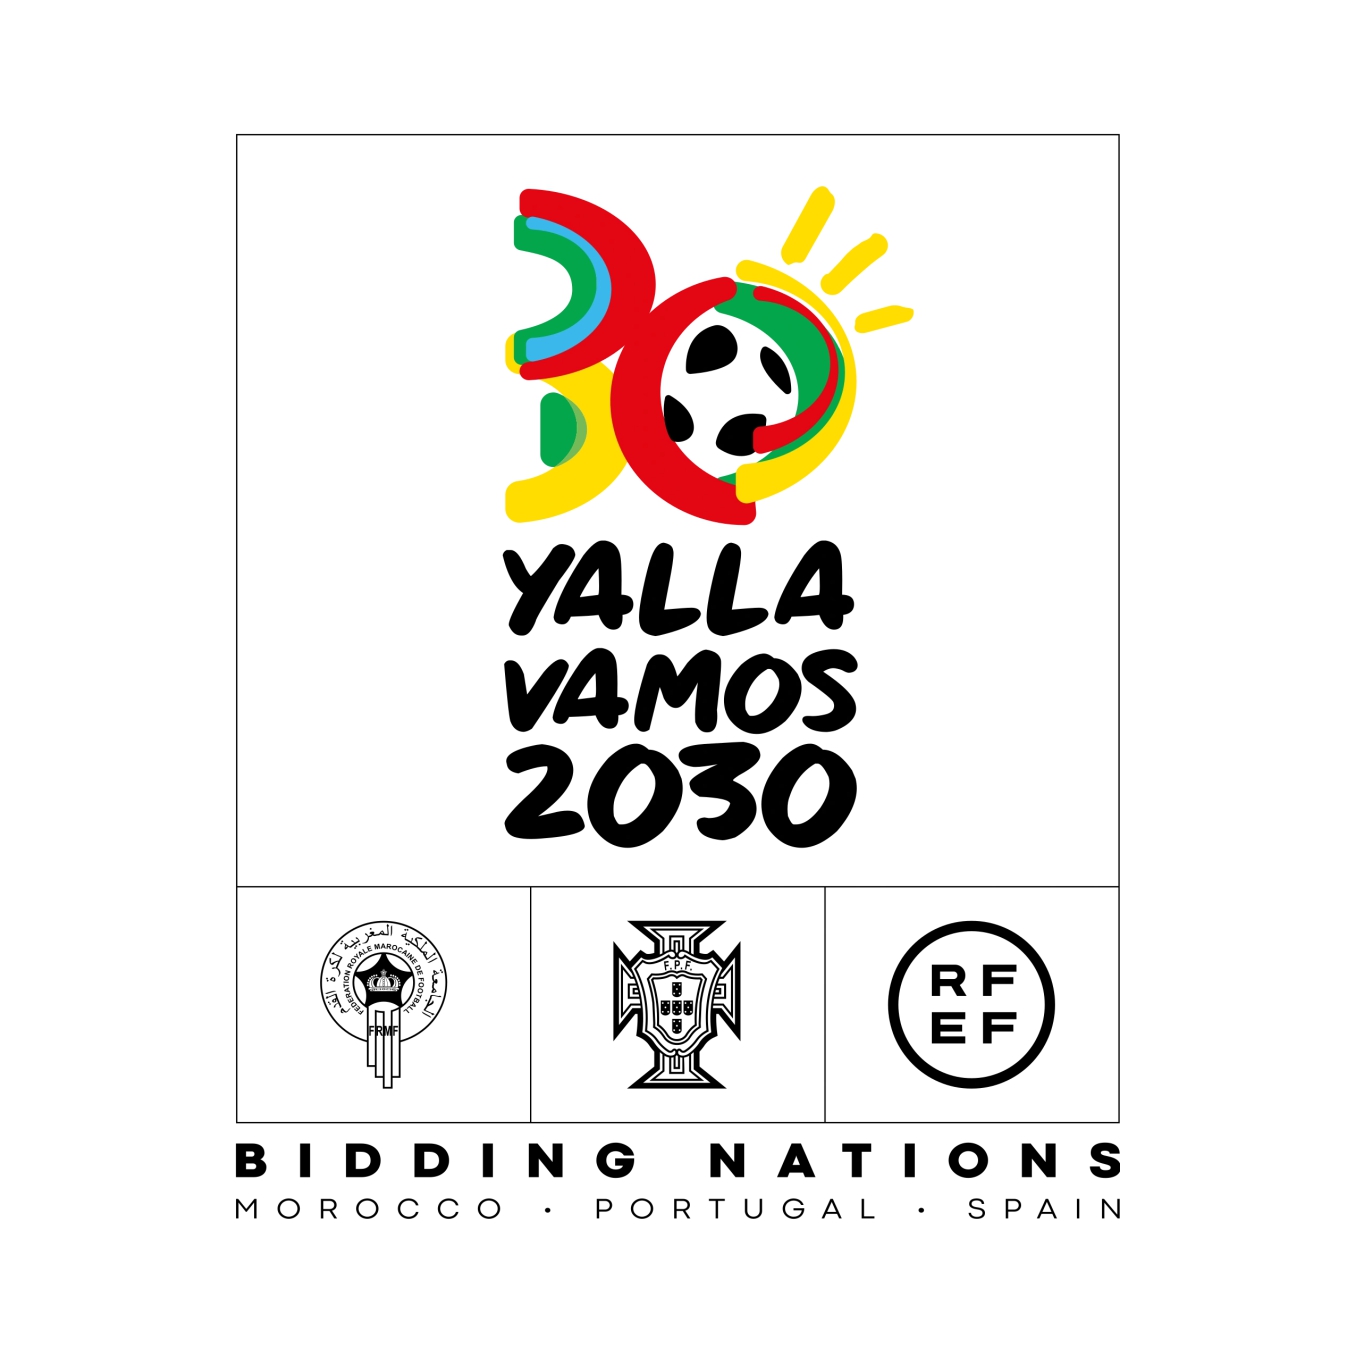 WorldCup 2030